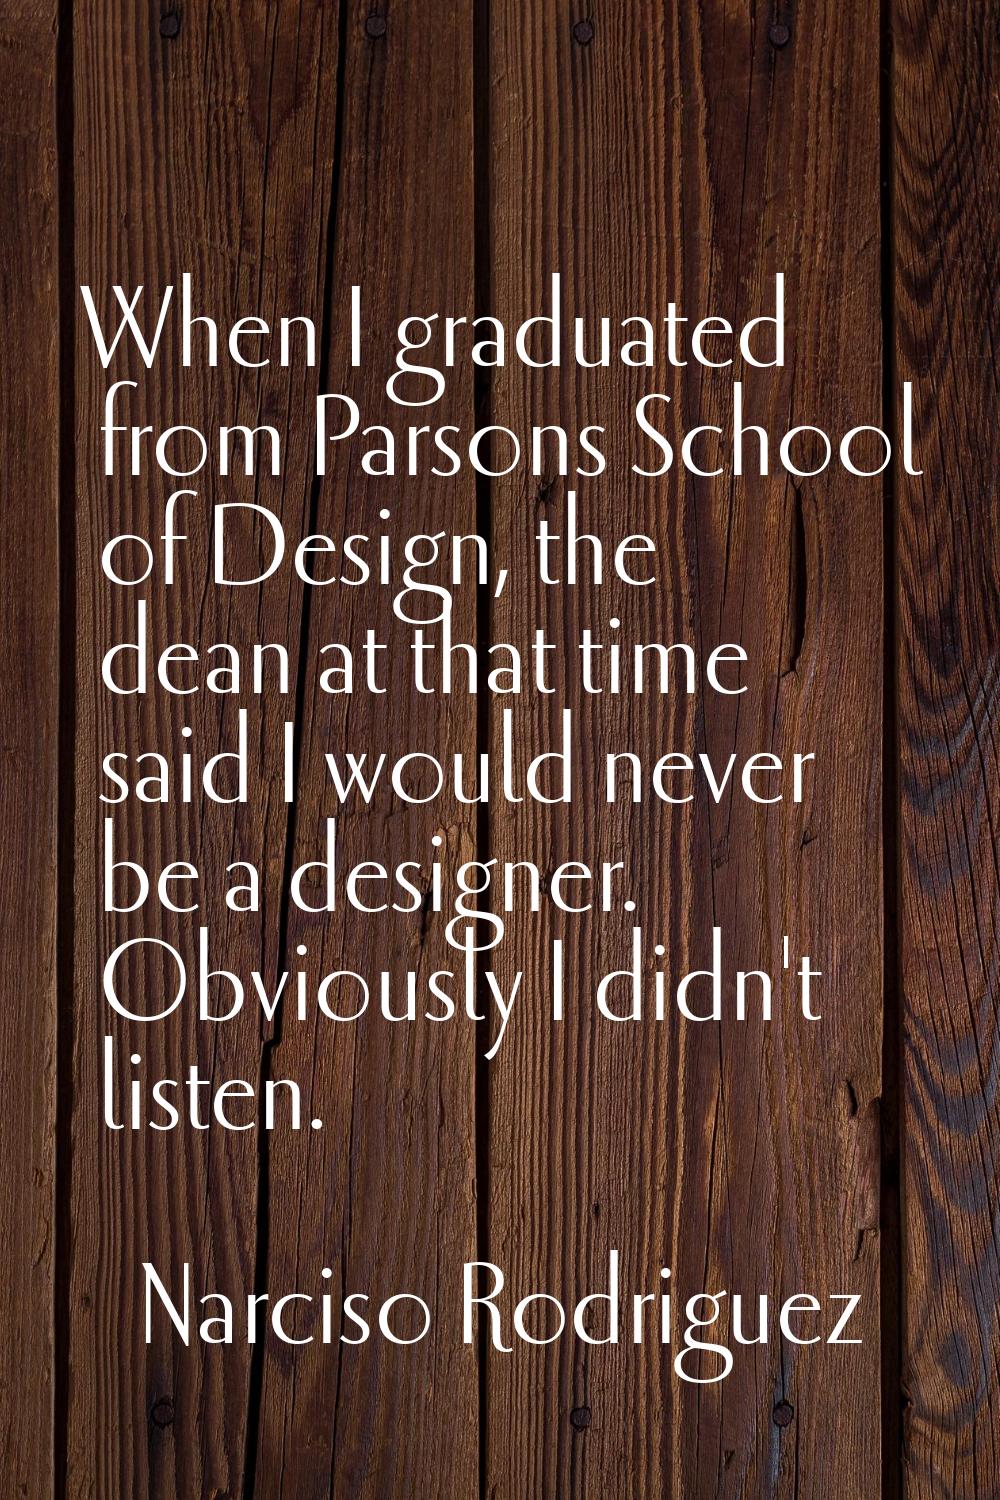 When I graduated from Parsons School of Design, the dean at that time said I would never be a desig